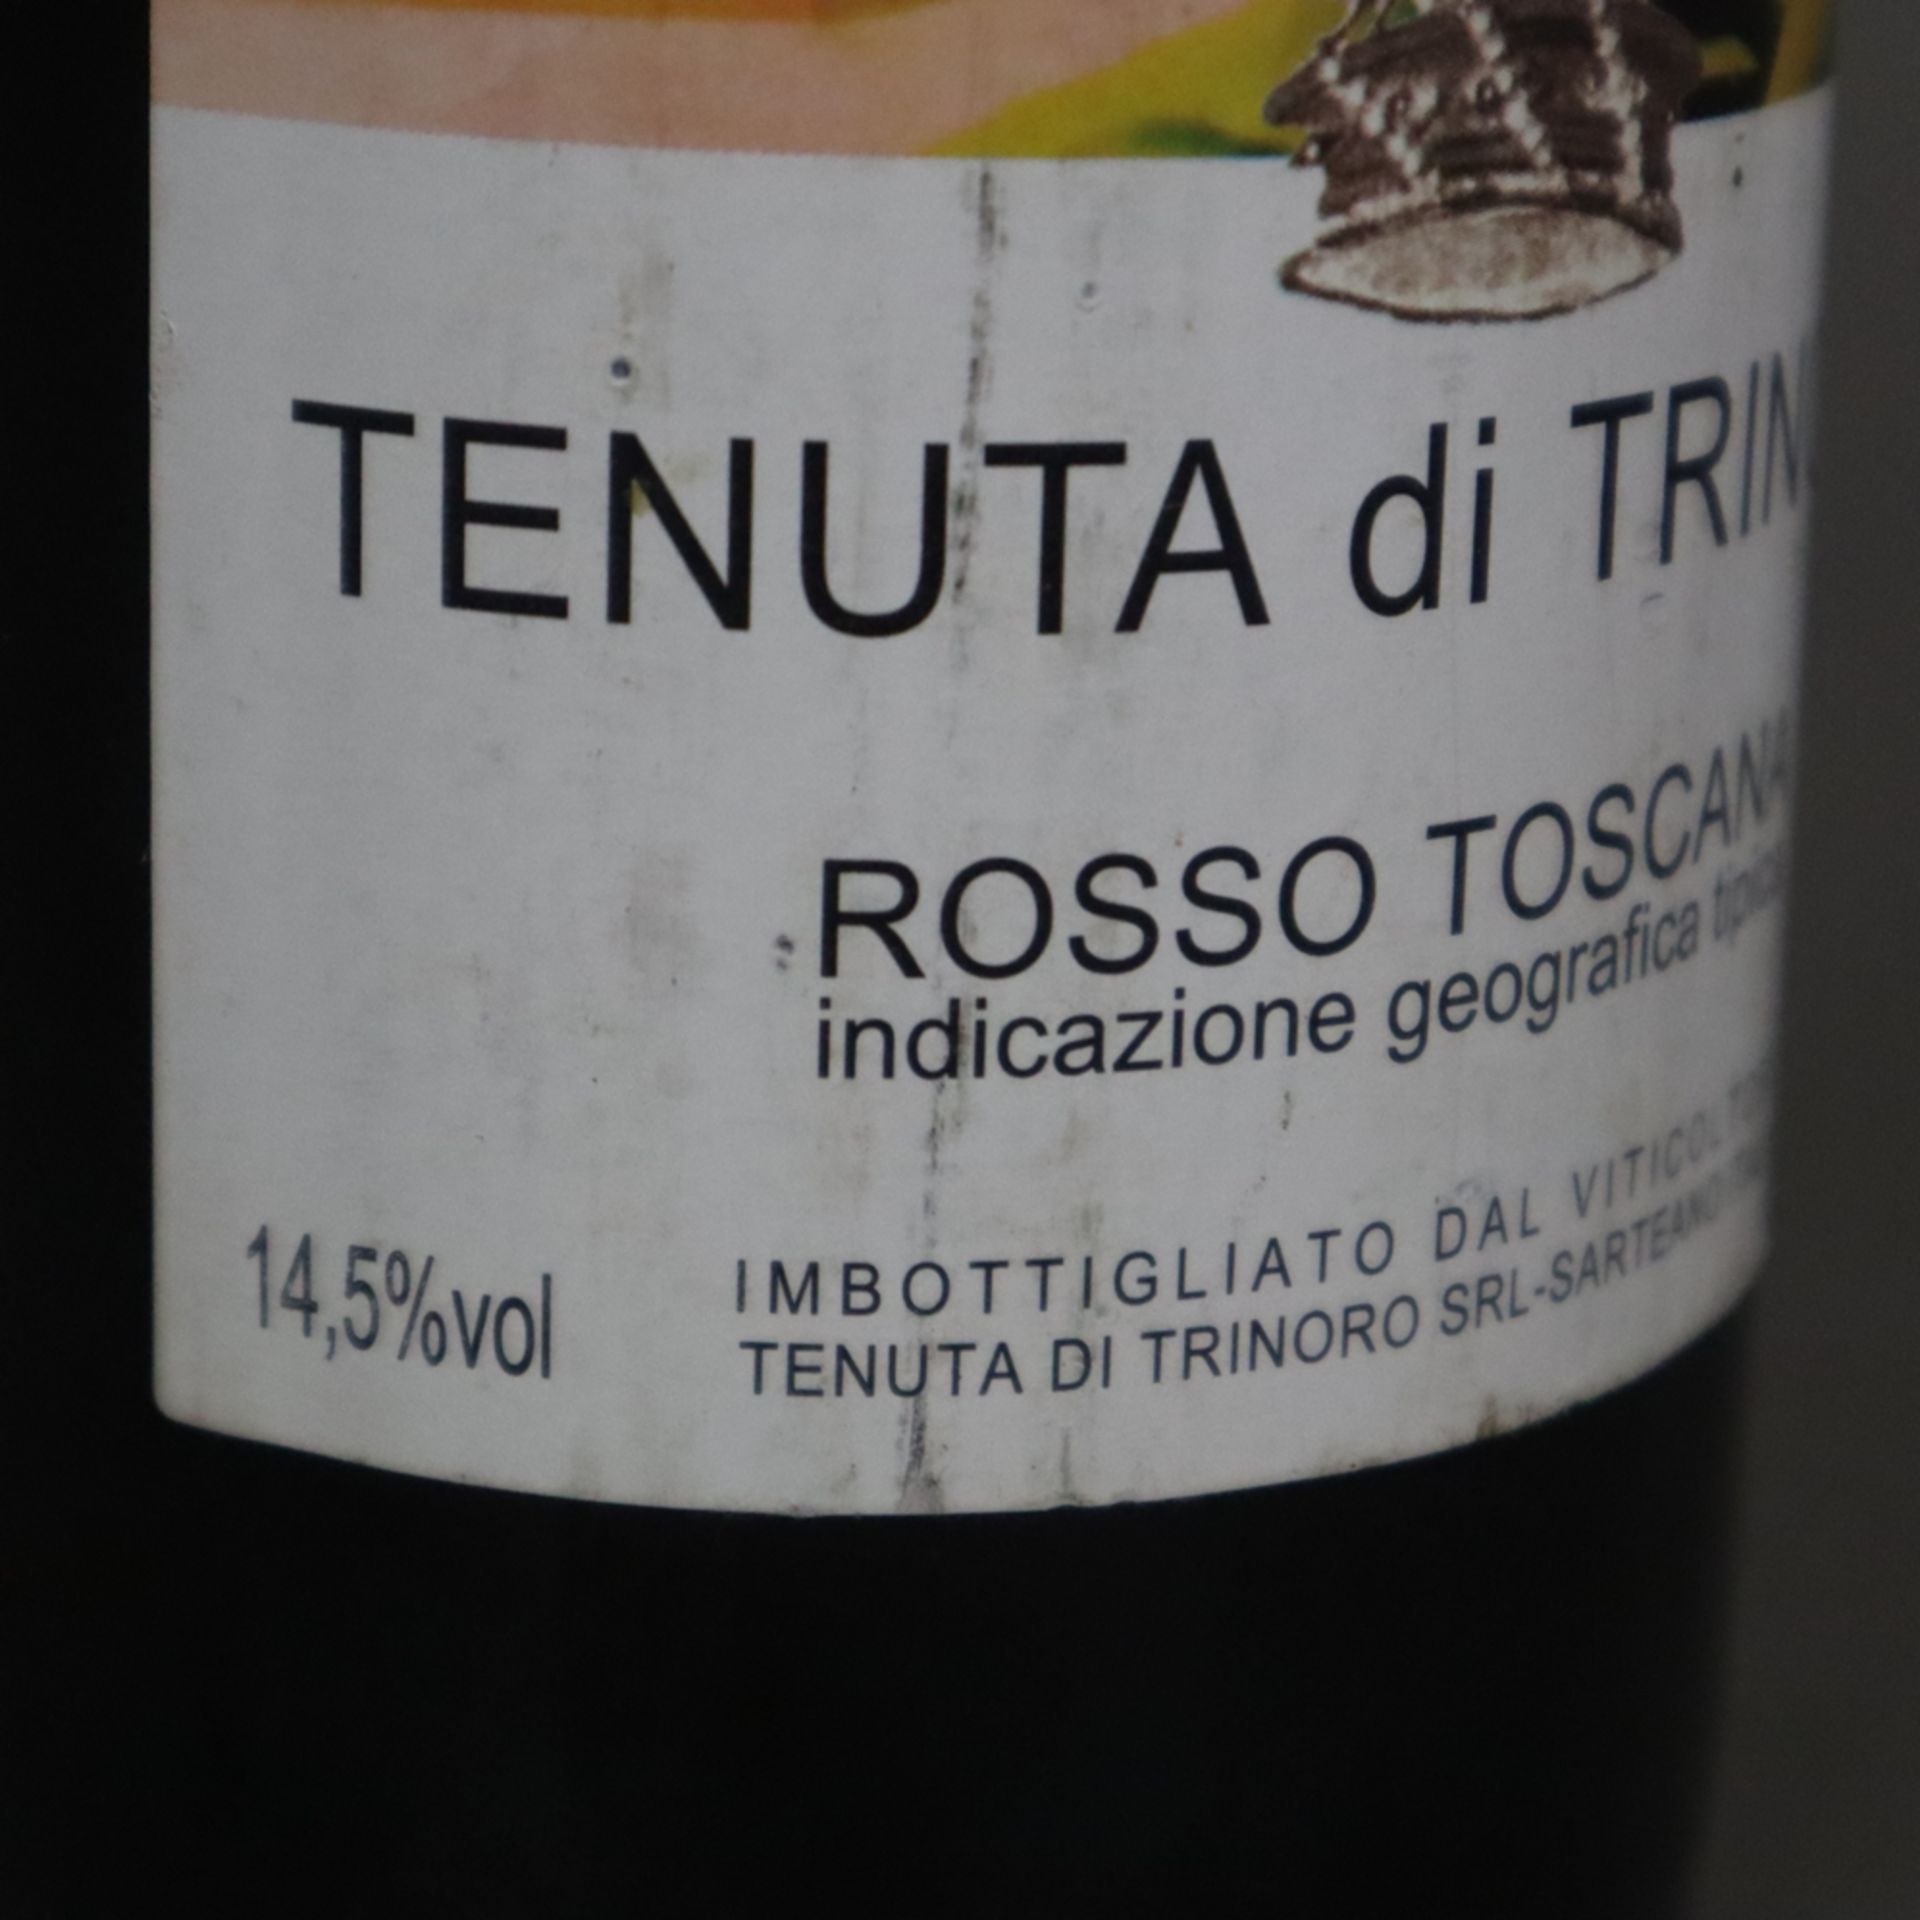 Wein - 2004 Tenuta di Trinoro Toscana IGT, Tuscany, Italy, Füllstand: Into Neck, 75 cl - Image 6 of 7